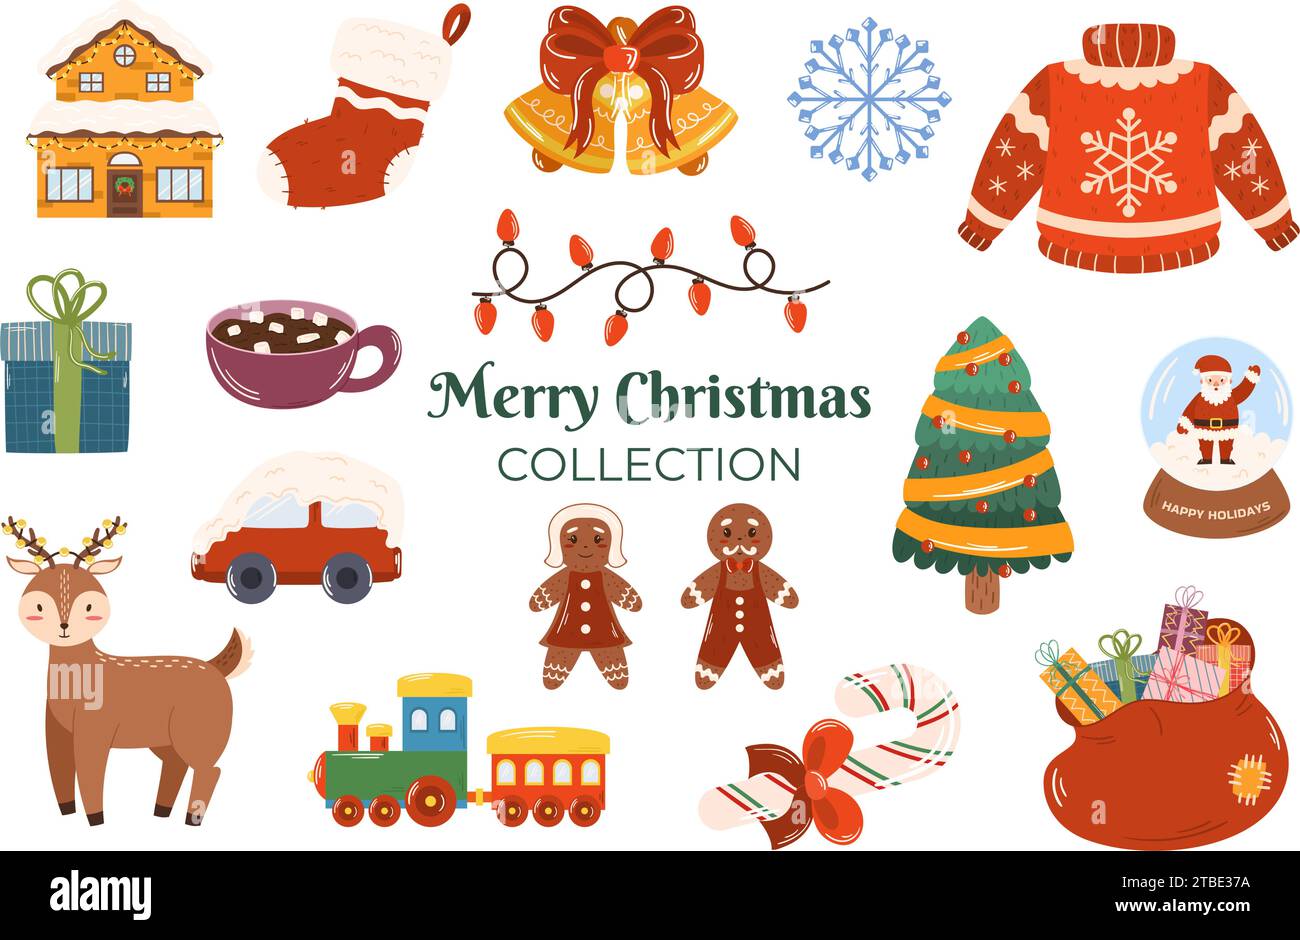 Christmas collection of different elements such a winter yellow house, bells with red bow, cocoa with marshmallow, car in snow, candy cane, deer, sweater and train toy. Stock Vector